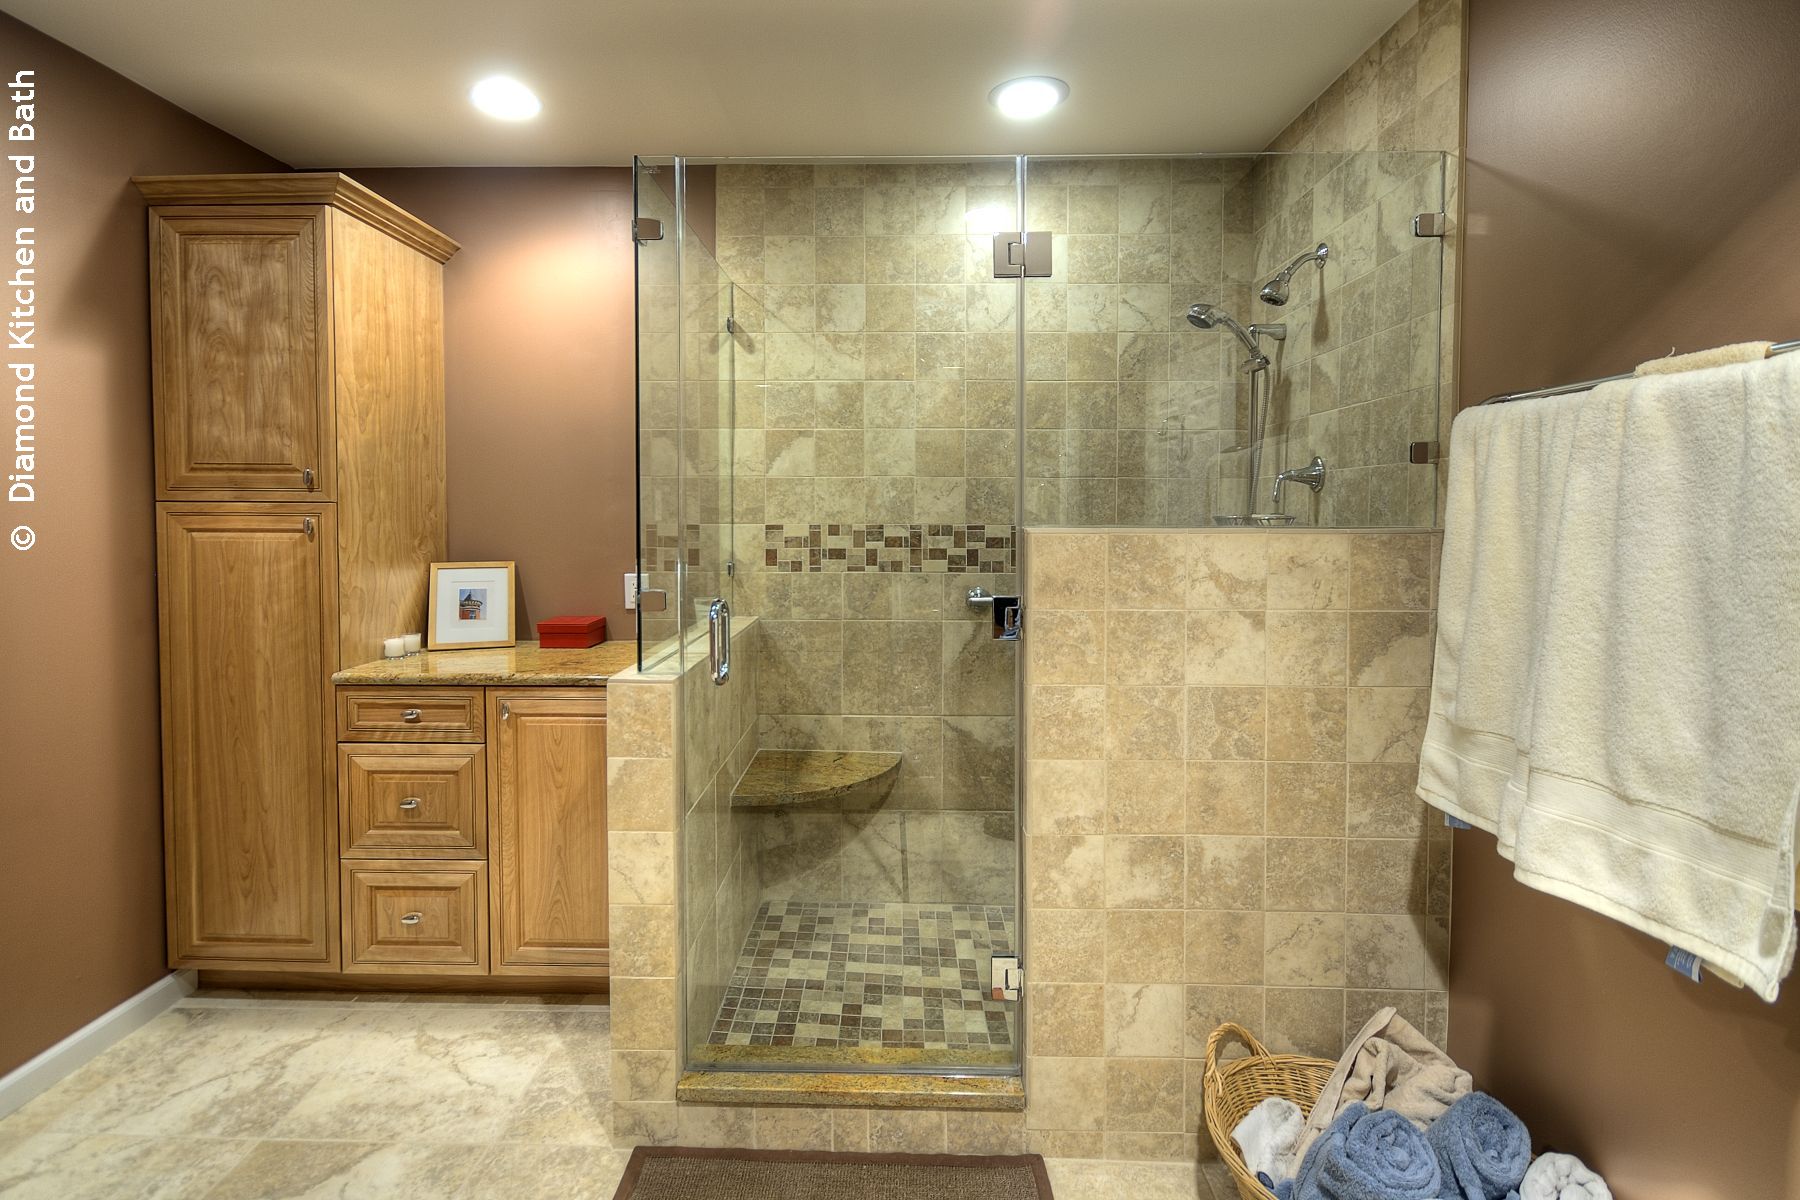 Bathroom Remodeling Virtual Tour in New Hope, PA